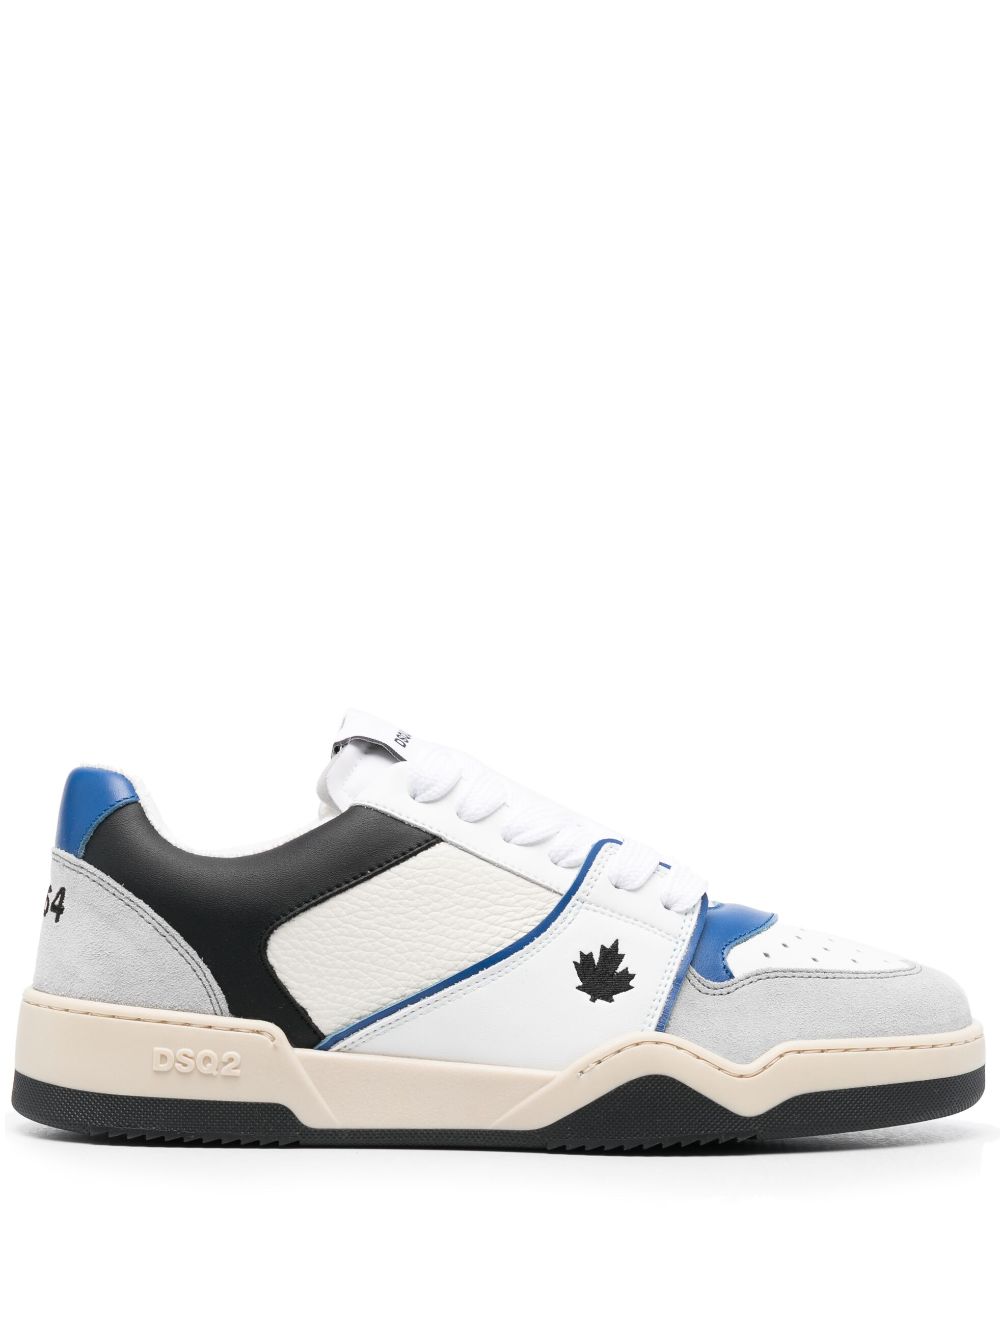 Dsquared2 Spider Leather Low-top Sneakers In White